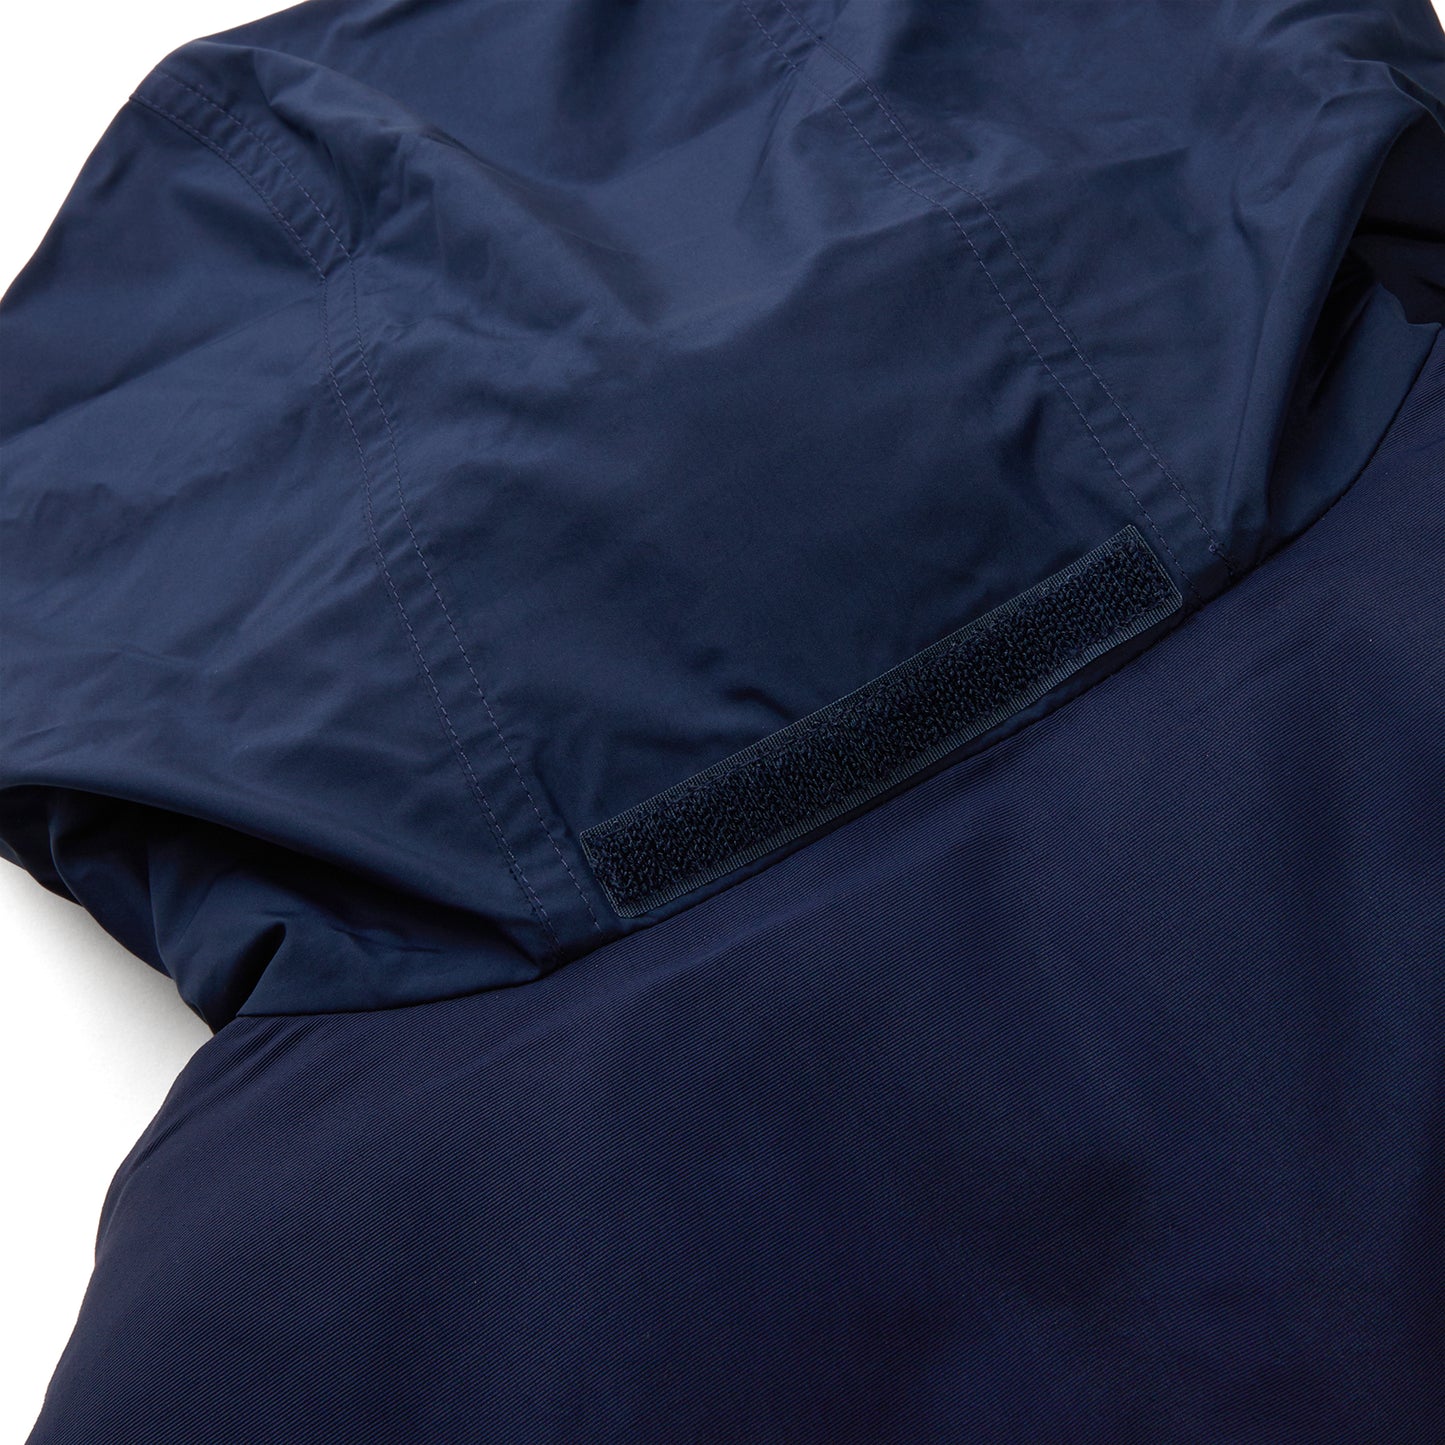 The North Face M 92 Ripstop Nupste Jacket (Summit Navy)